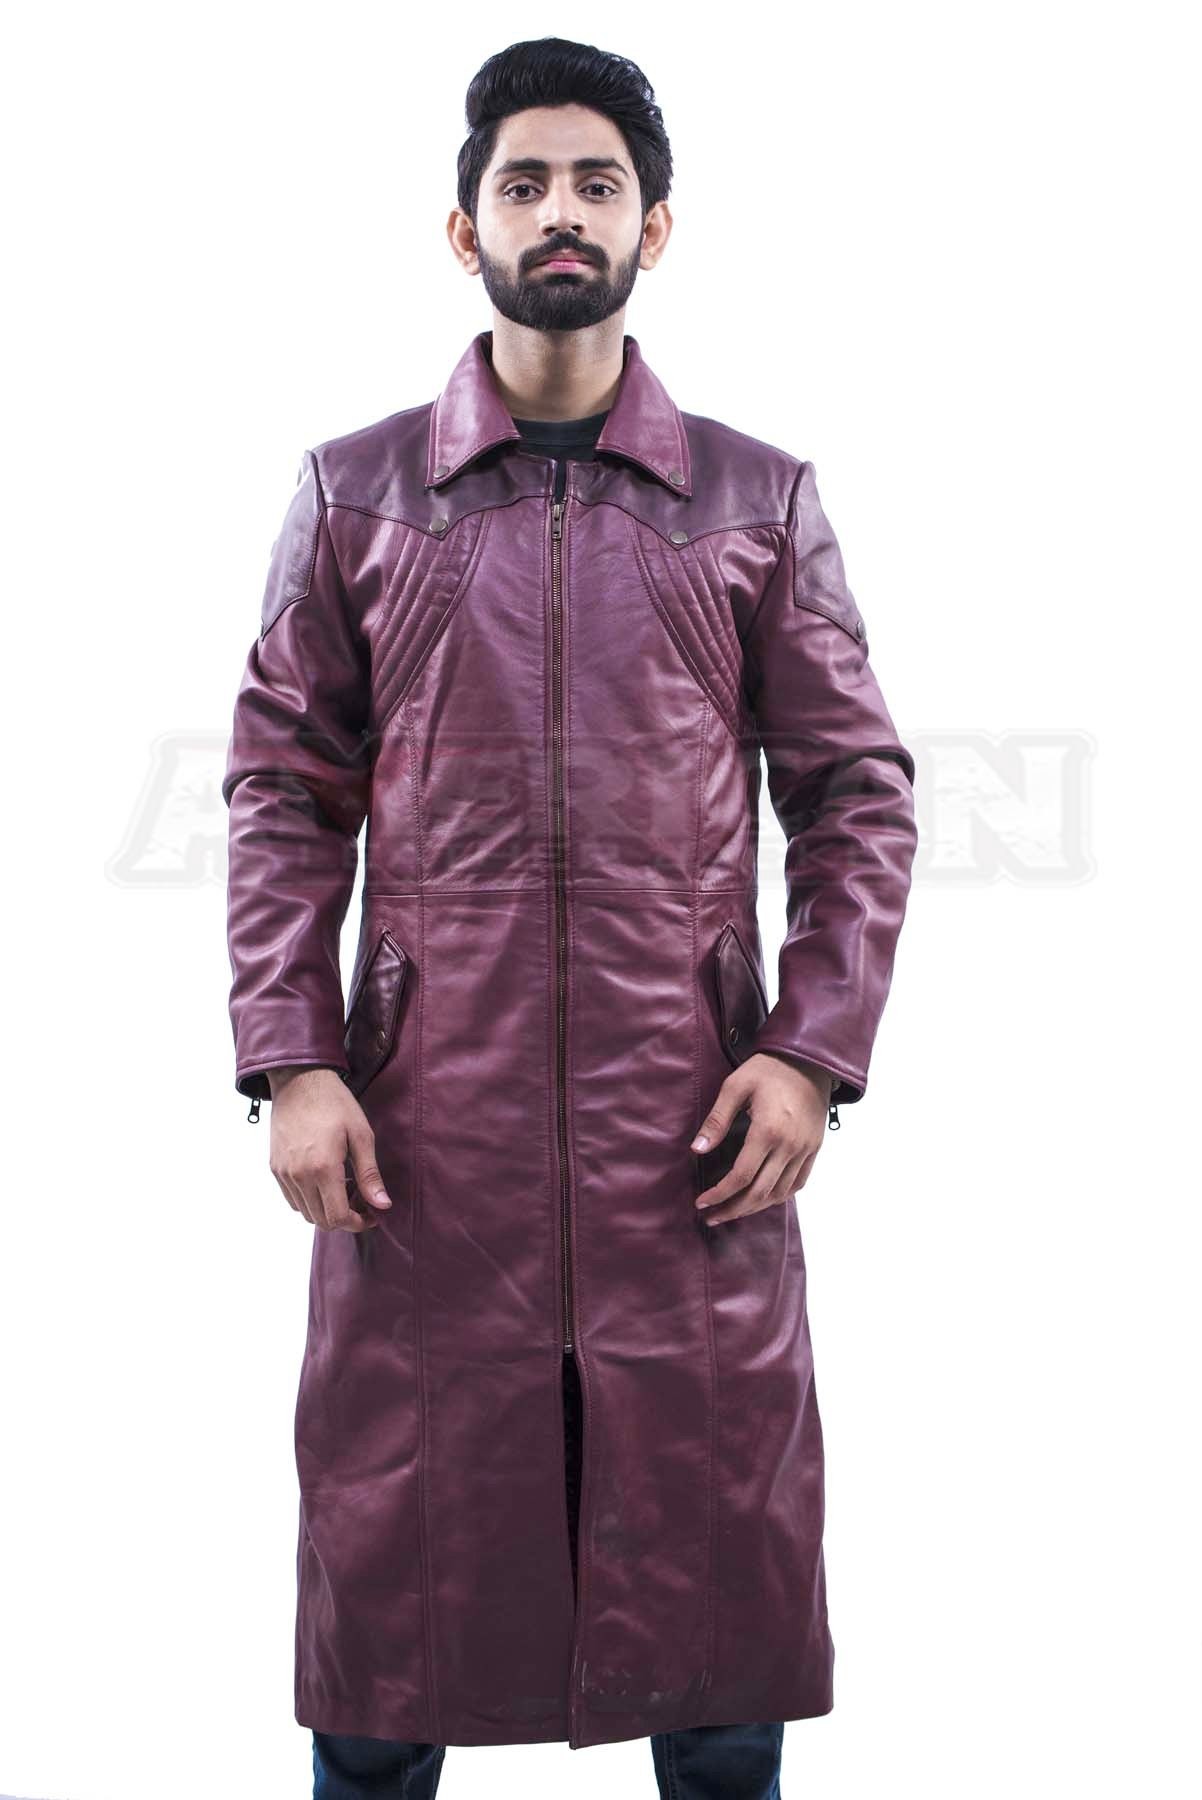 Devil May Cry 4 Dante Leather Coat